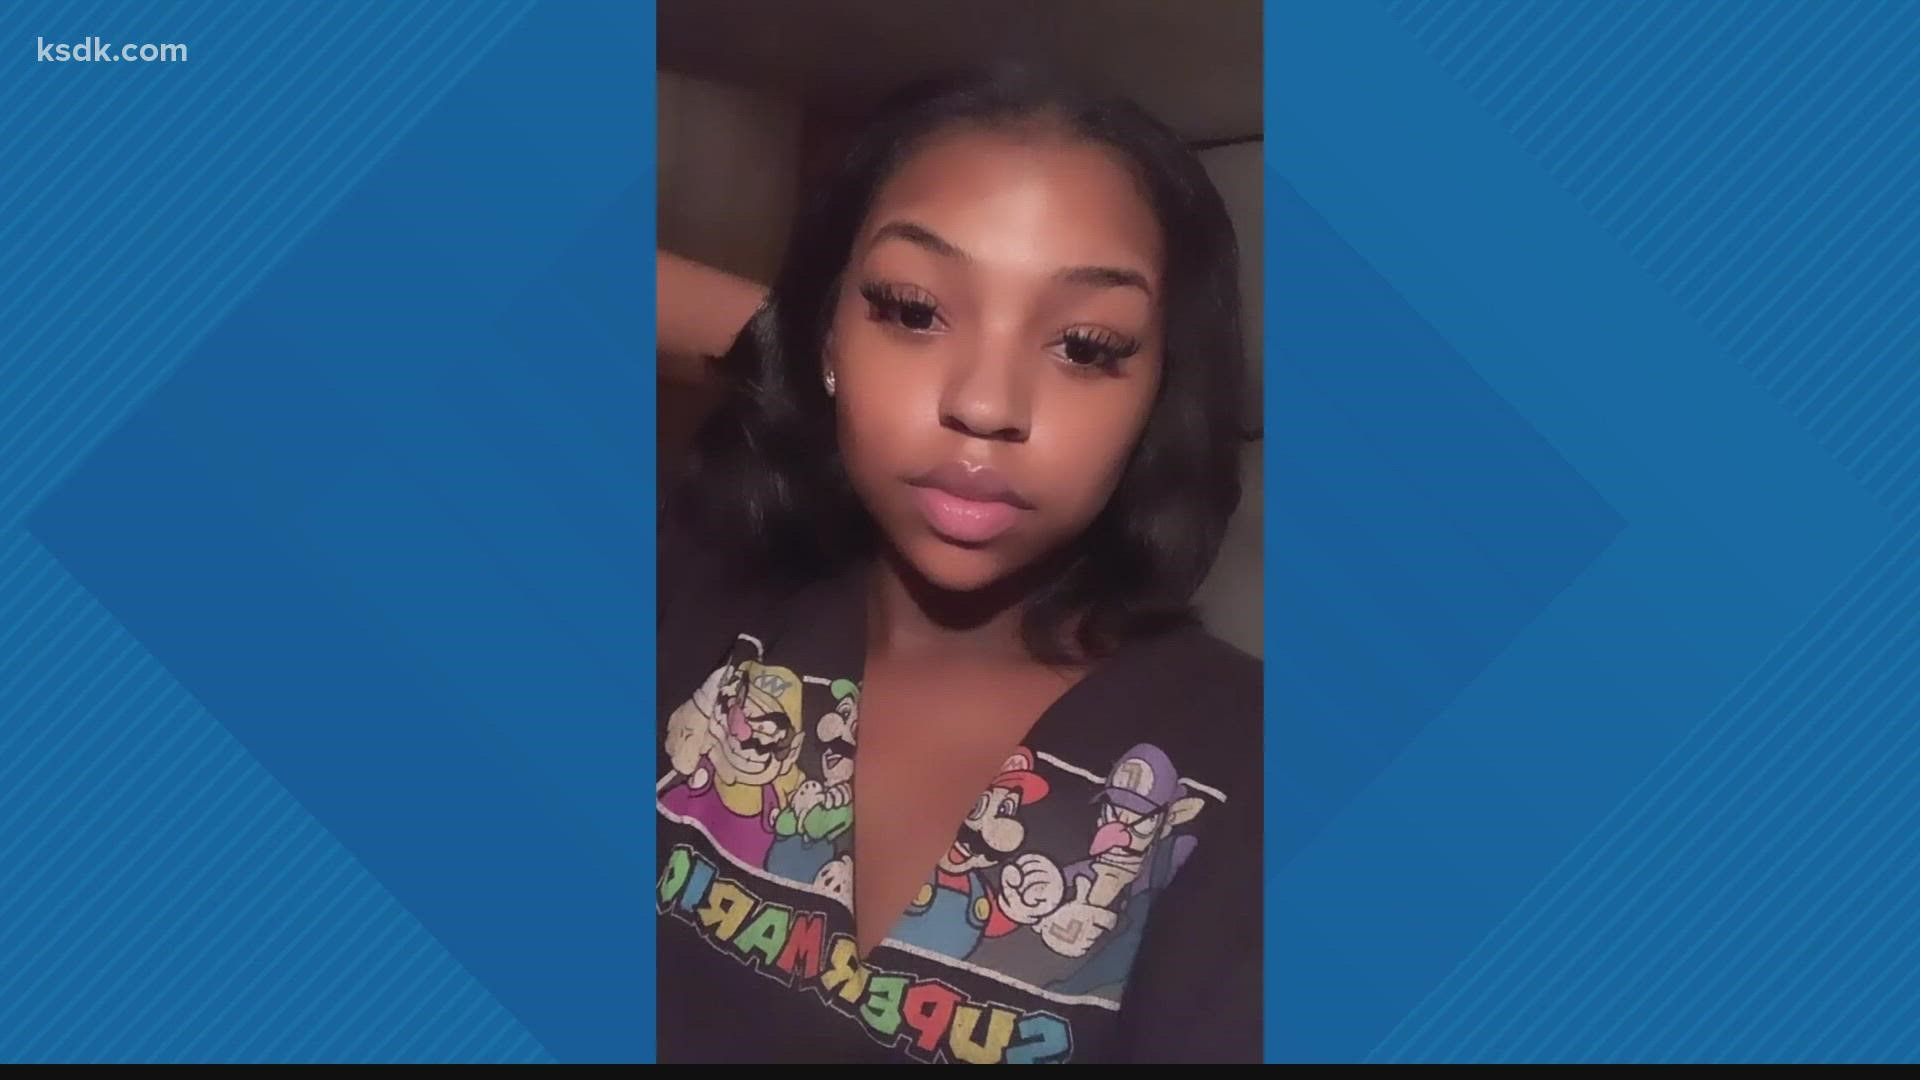 The driver that caused the crash was caught a short time later. Samantha Washington was a high school student in the Ritenour School District with a 5-month-old.